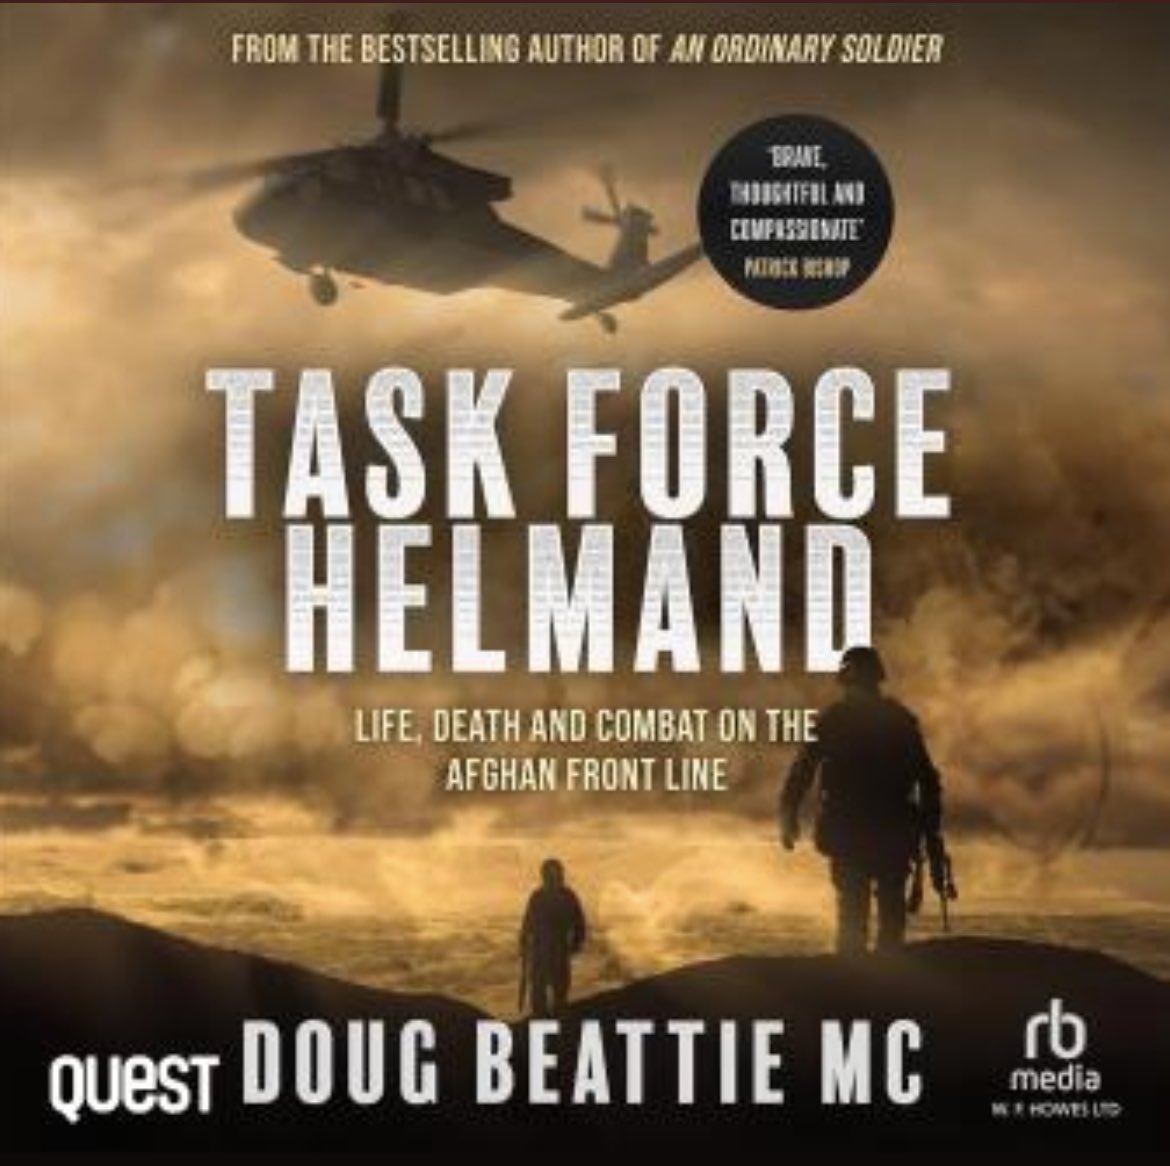 15 years since the publication of my second book and it has now been published as an audio book. 😊 #TaskForceHelmand Thank you to @PhilipGomm1 & @andrewlownie as well as @Drew_Dillon for narrating. 👏👏👏